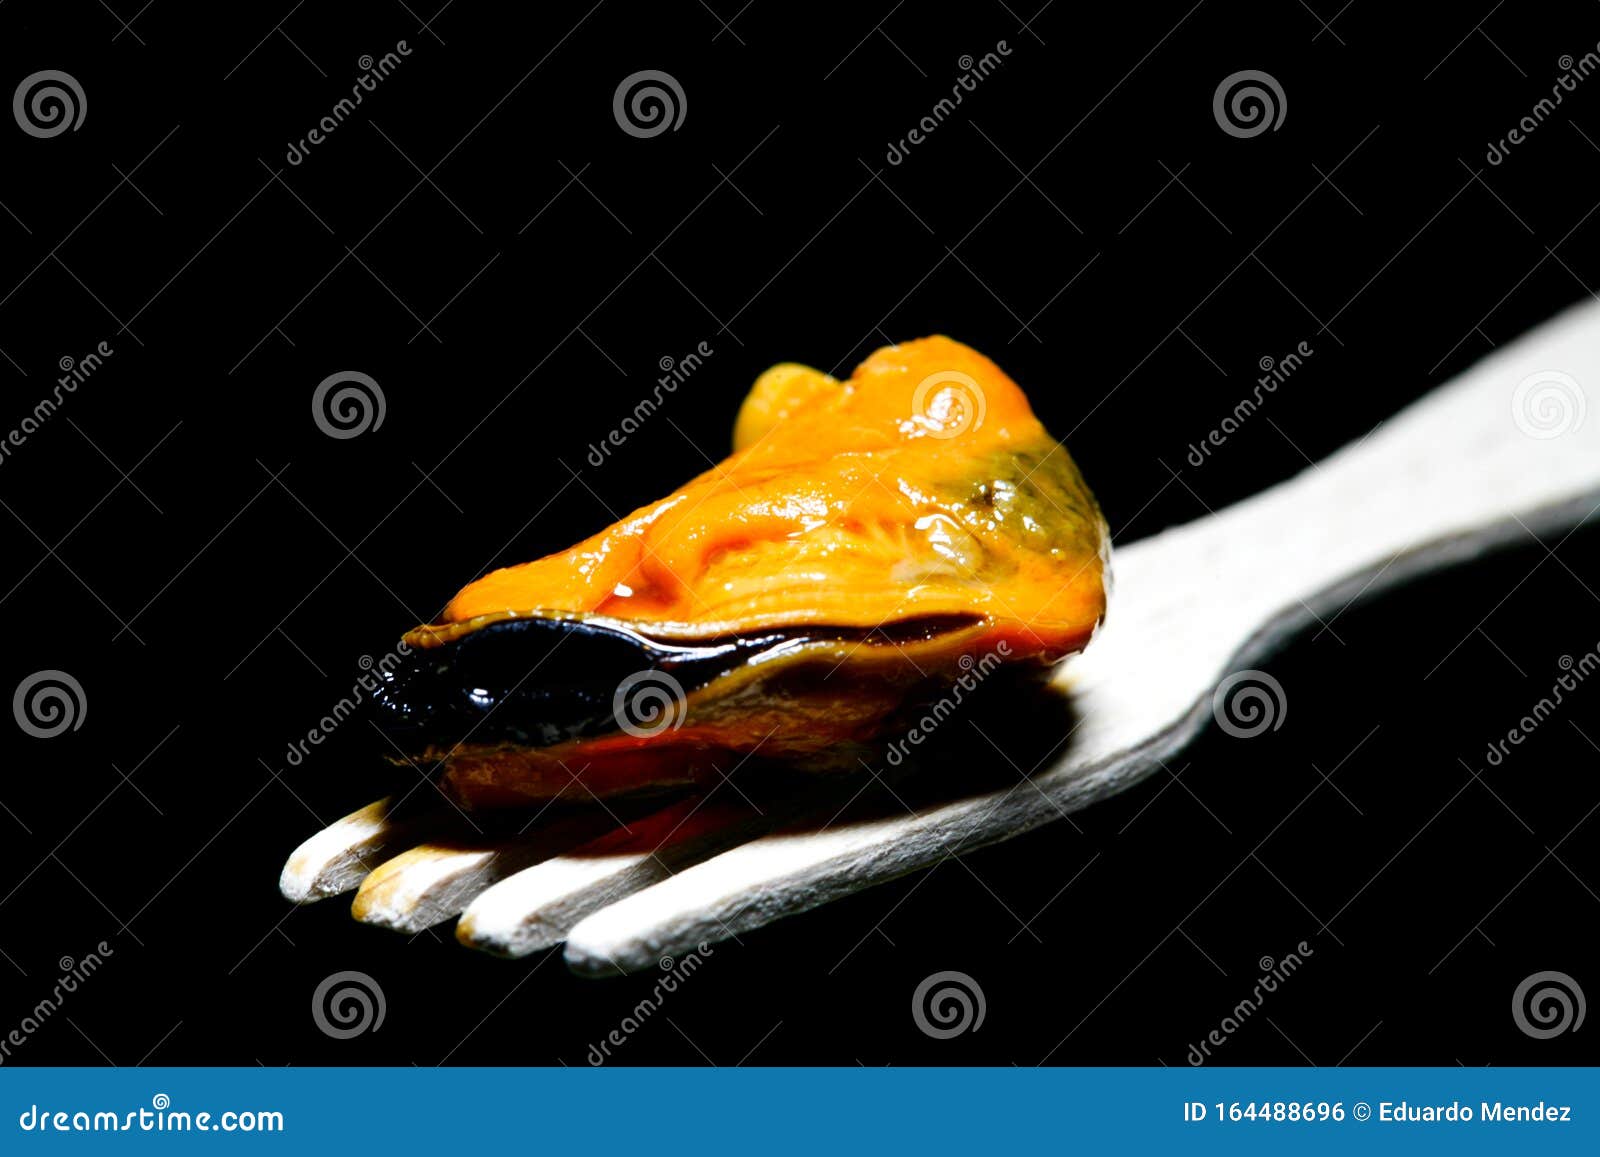 pickled mussel on a wooden fork